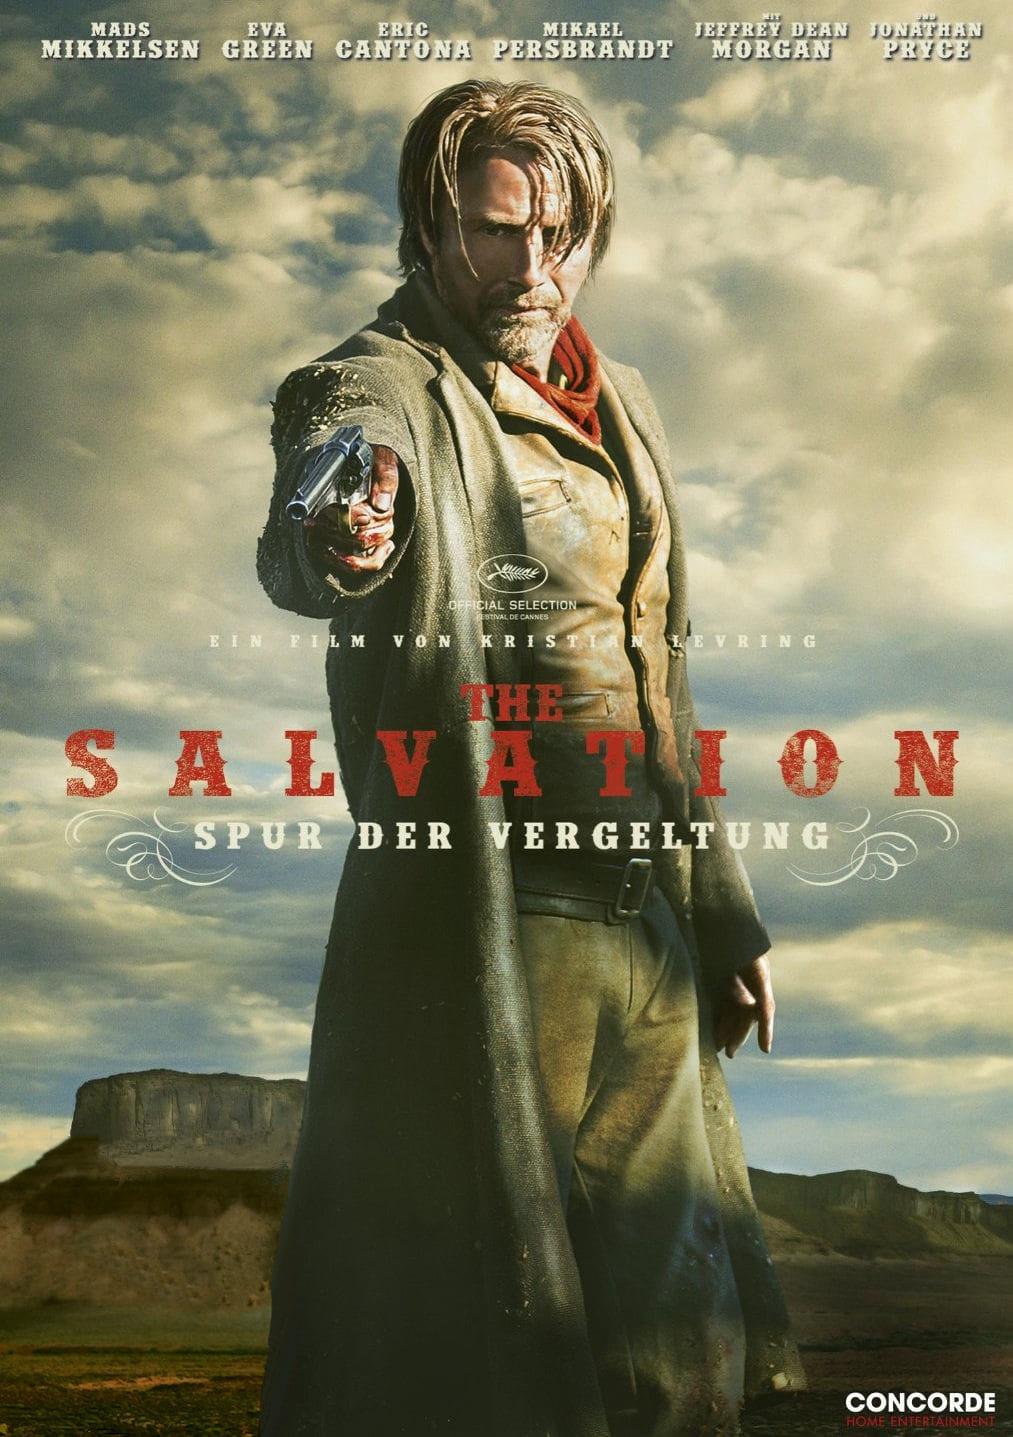 The Salvation poster